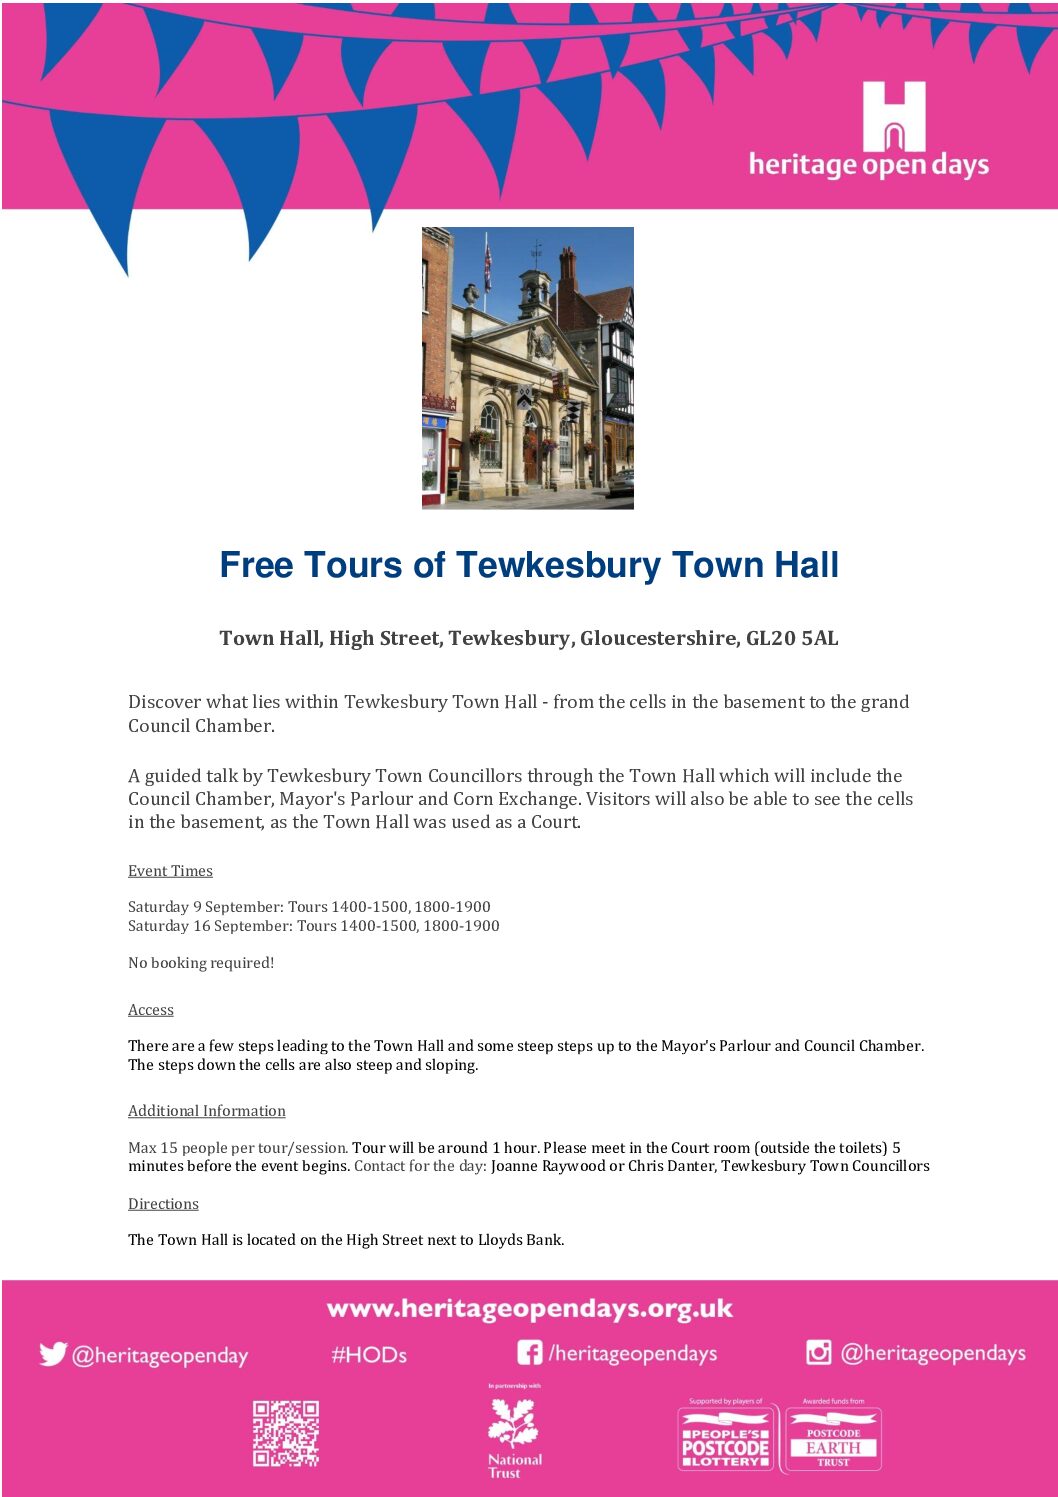 Free tours of the Town Hall – part of Heritage Open Days